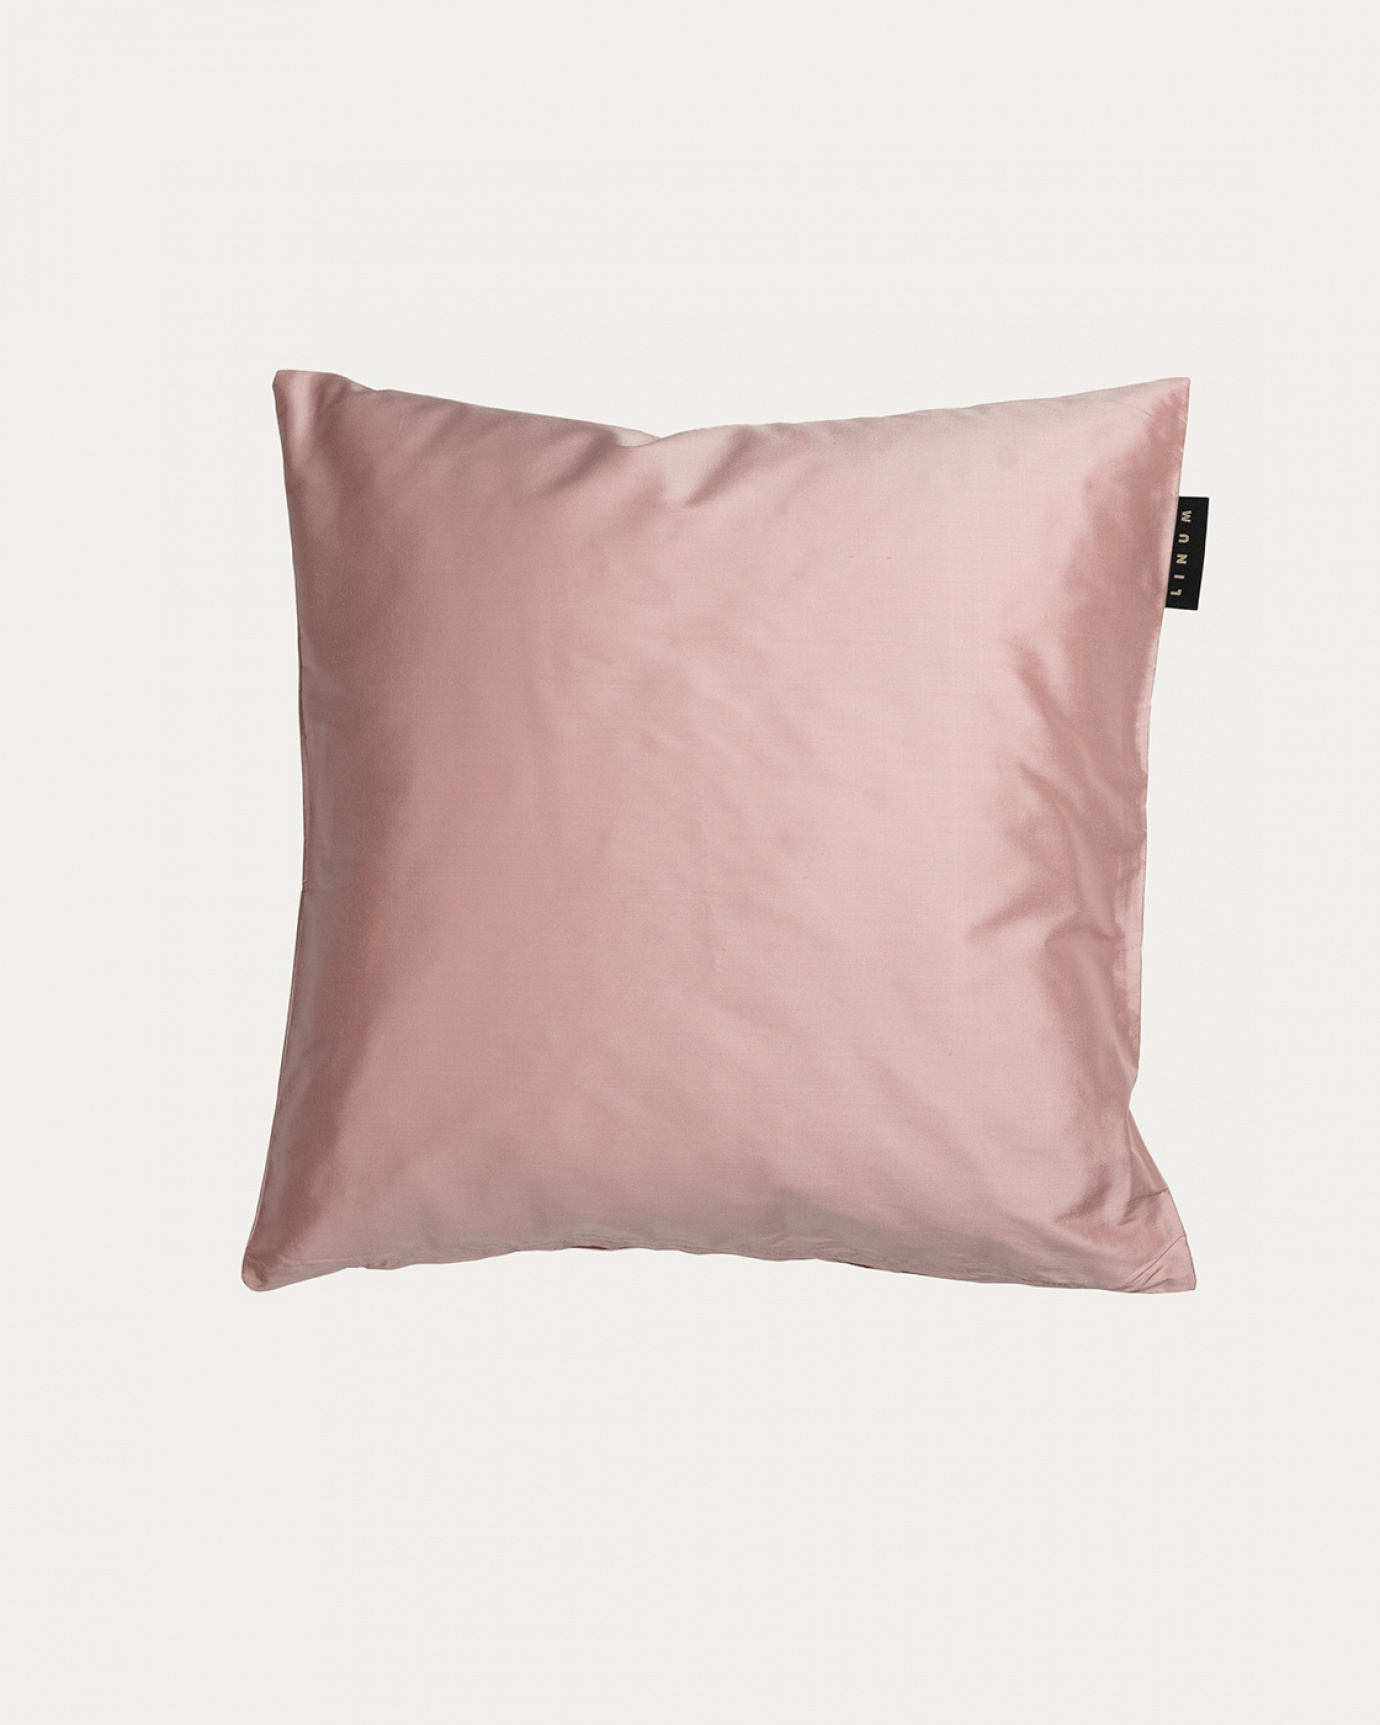 Product image dusty pink SILK cushion cover made of 100% dupion silk that gives a nice lustre from LINUM DESIGN. Size 40x40 cm.